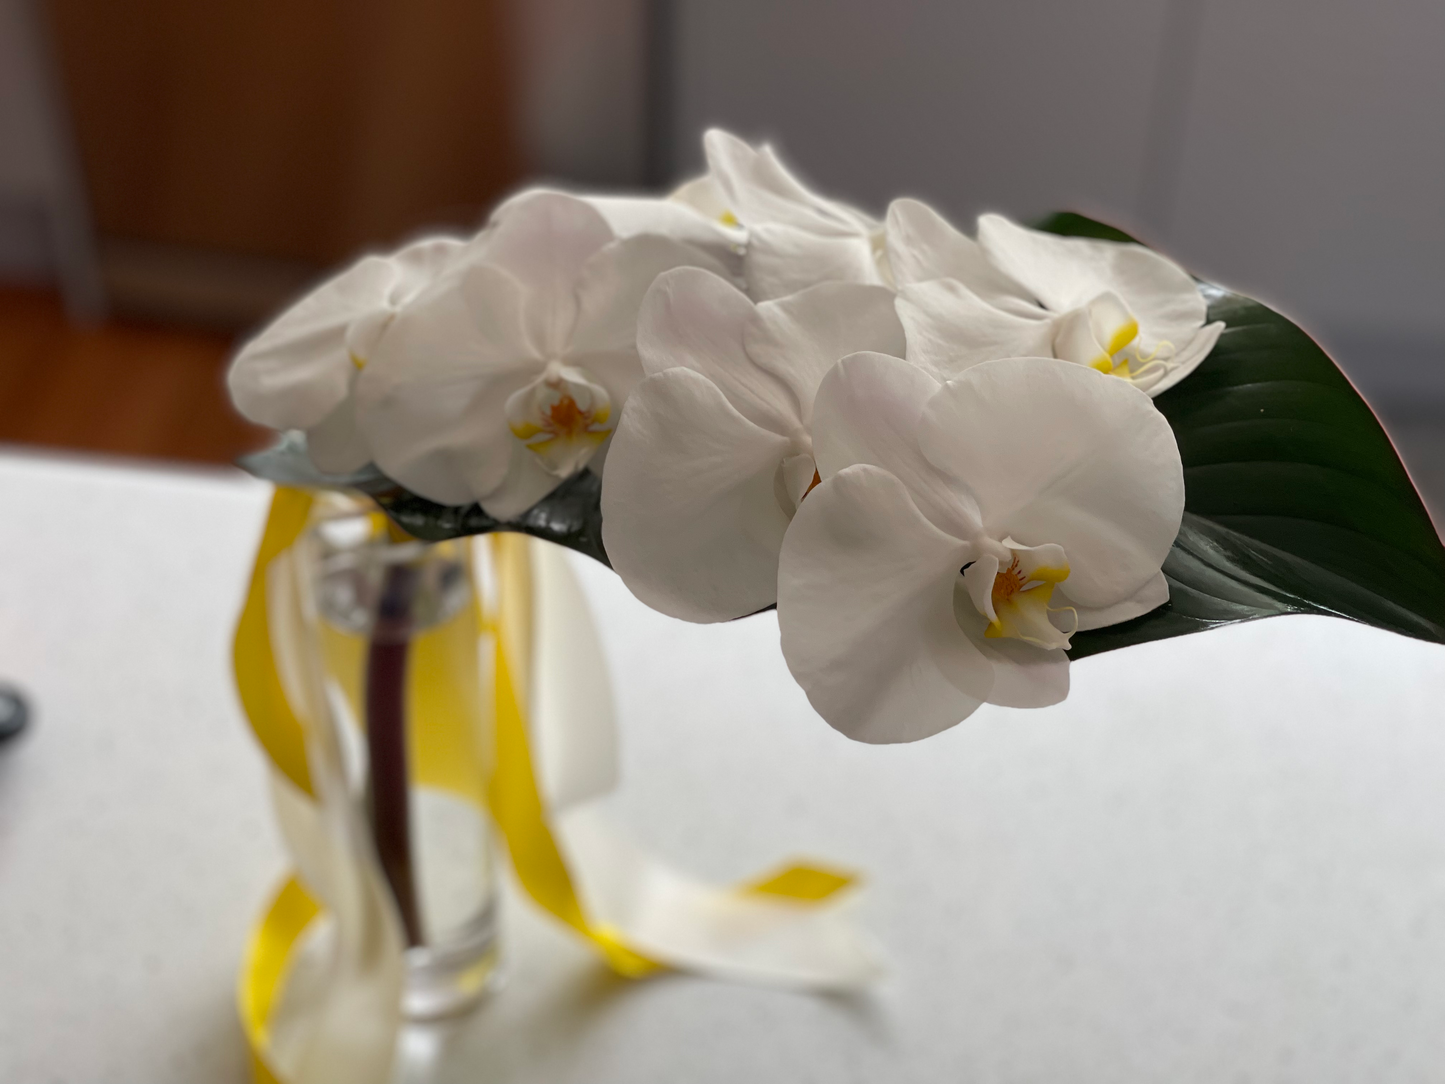 Classic Phalaenopsis orchid in glass vase